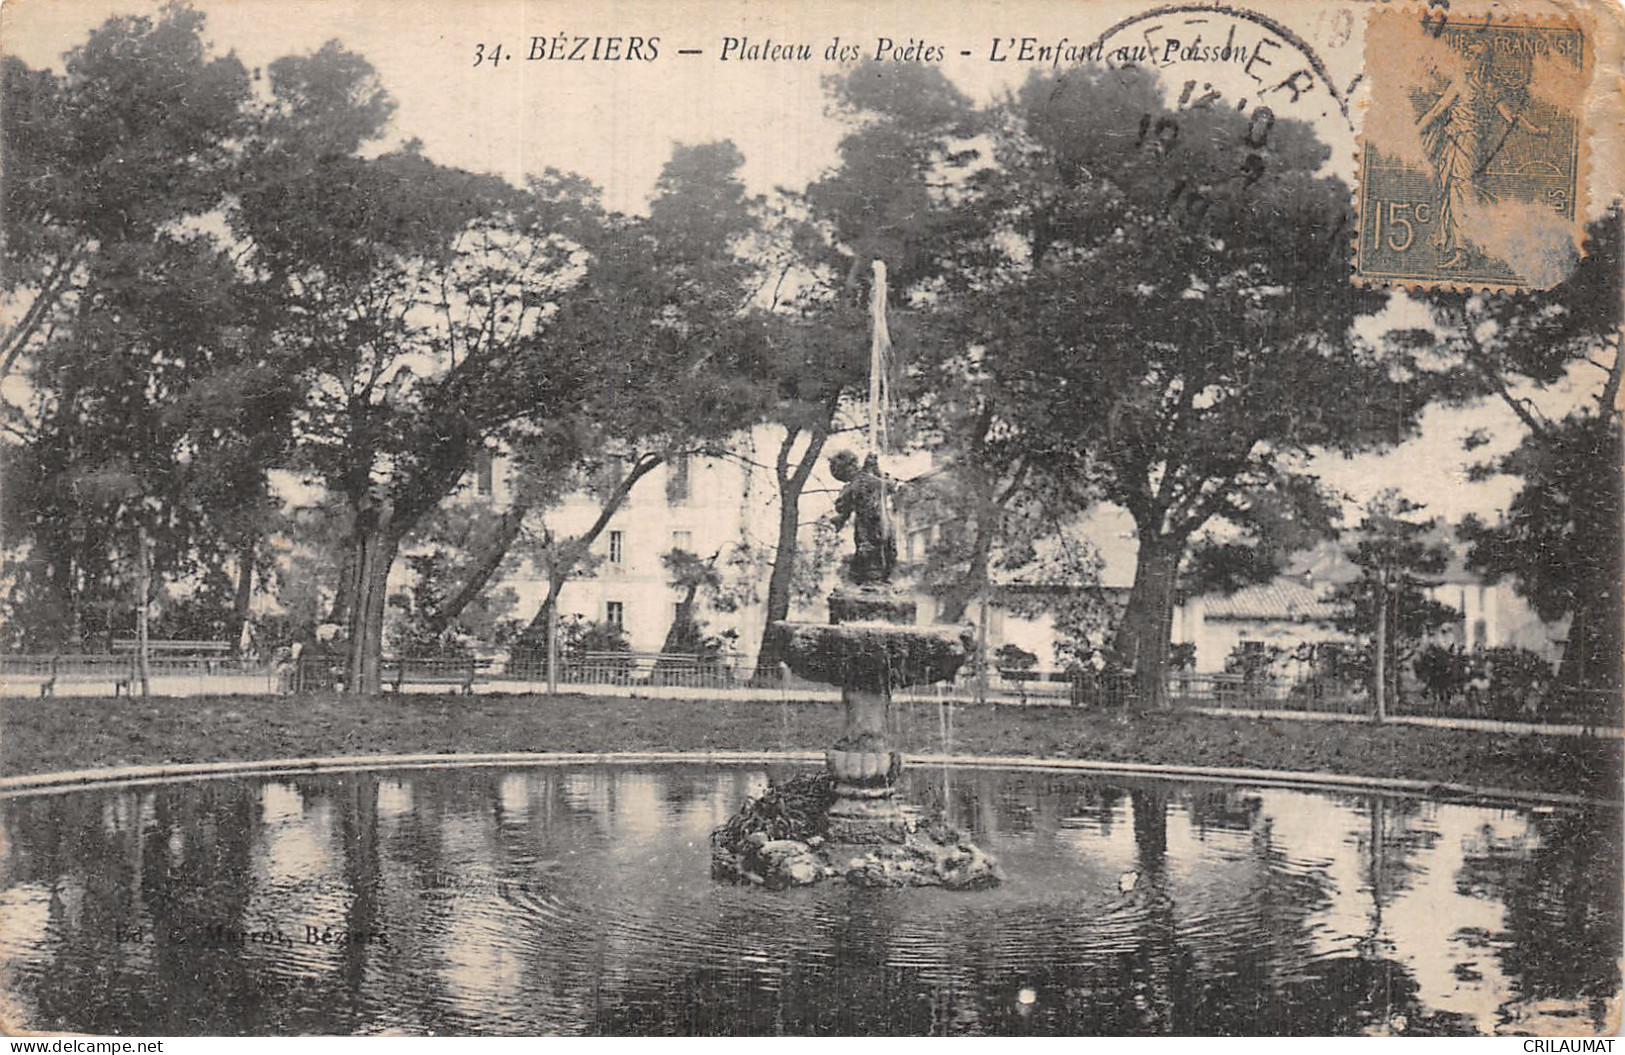 34-BEZIERS-N°5153-E/0257 - Beziers